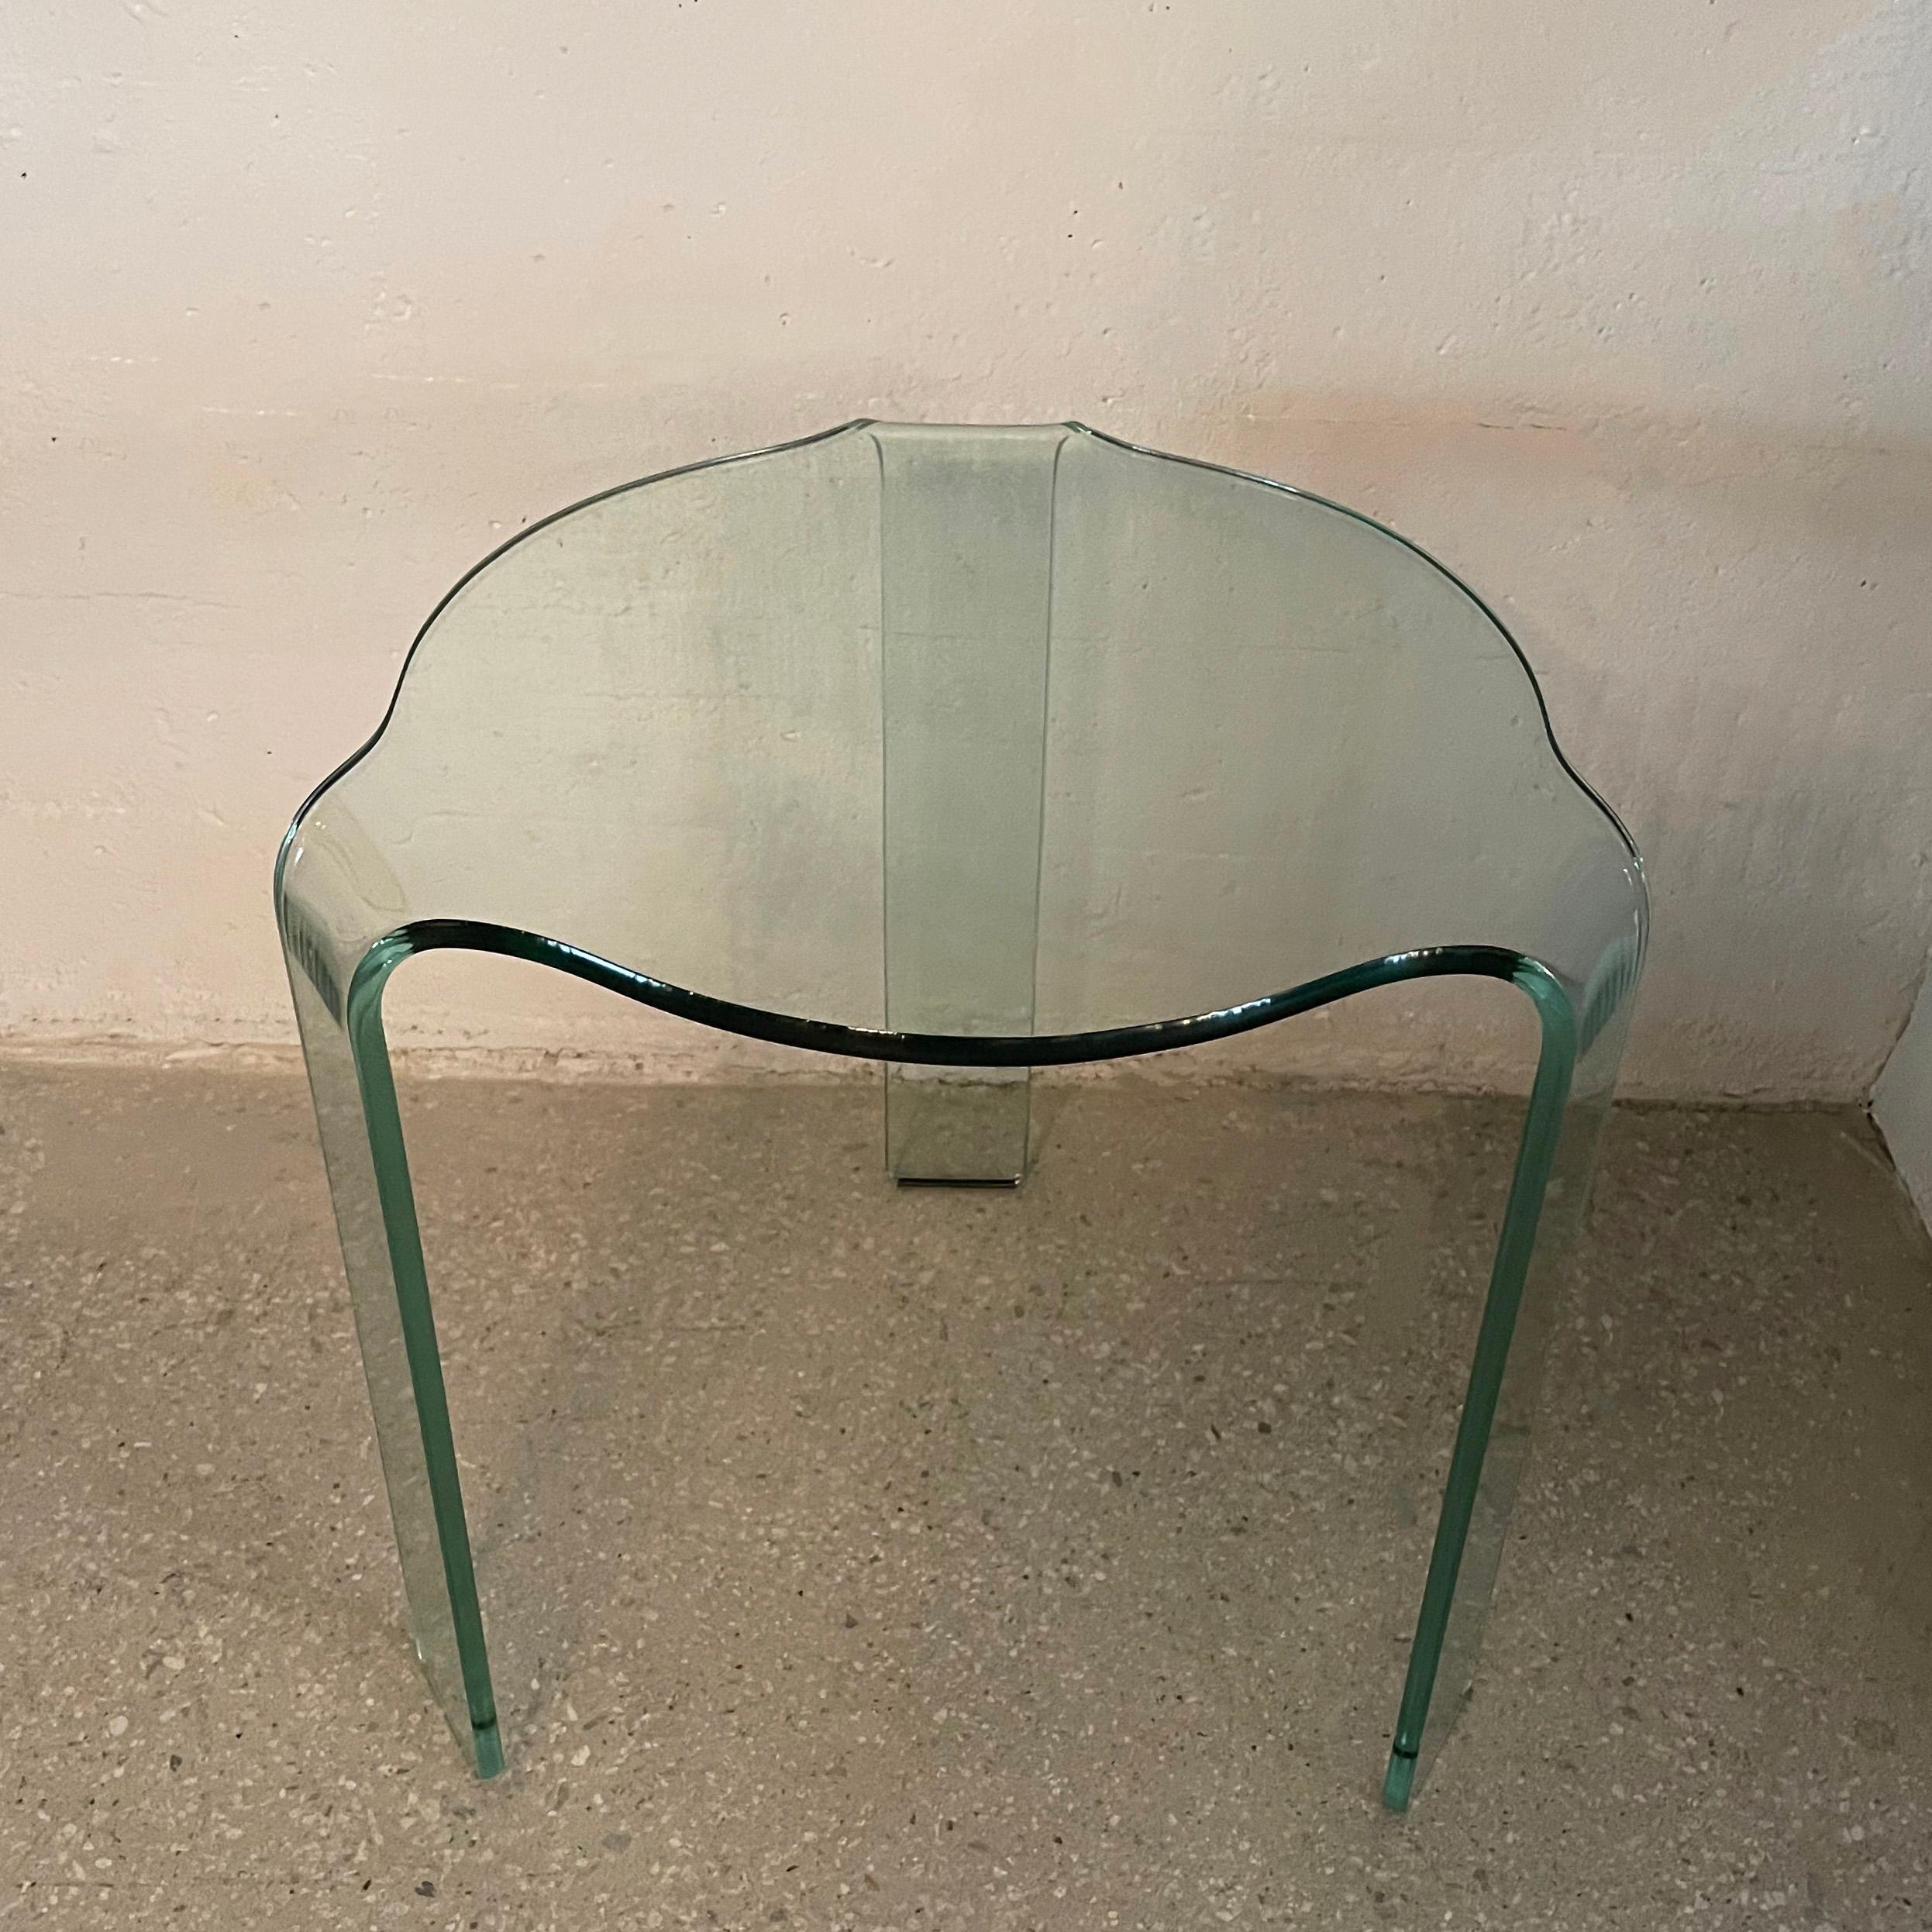 Modernist, bent glass side table with waterfall legs by Vittorio Livi for Fiam Italia, The Pace Collection, circa 1980. This table has also been attributed to Alvar Aalto.